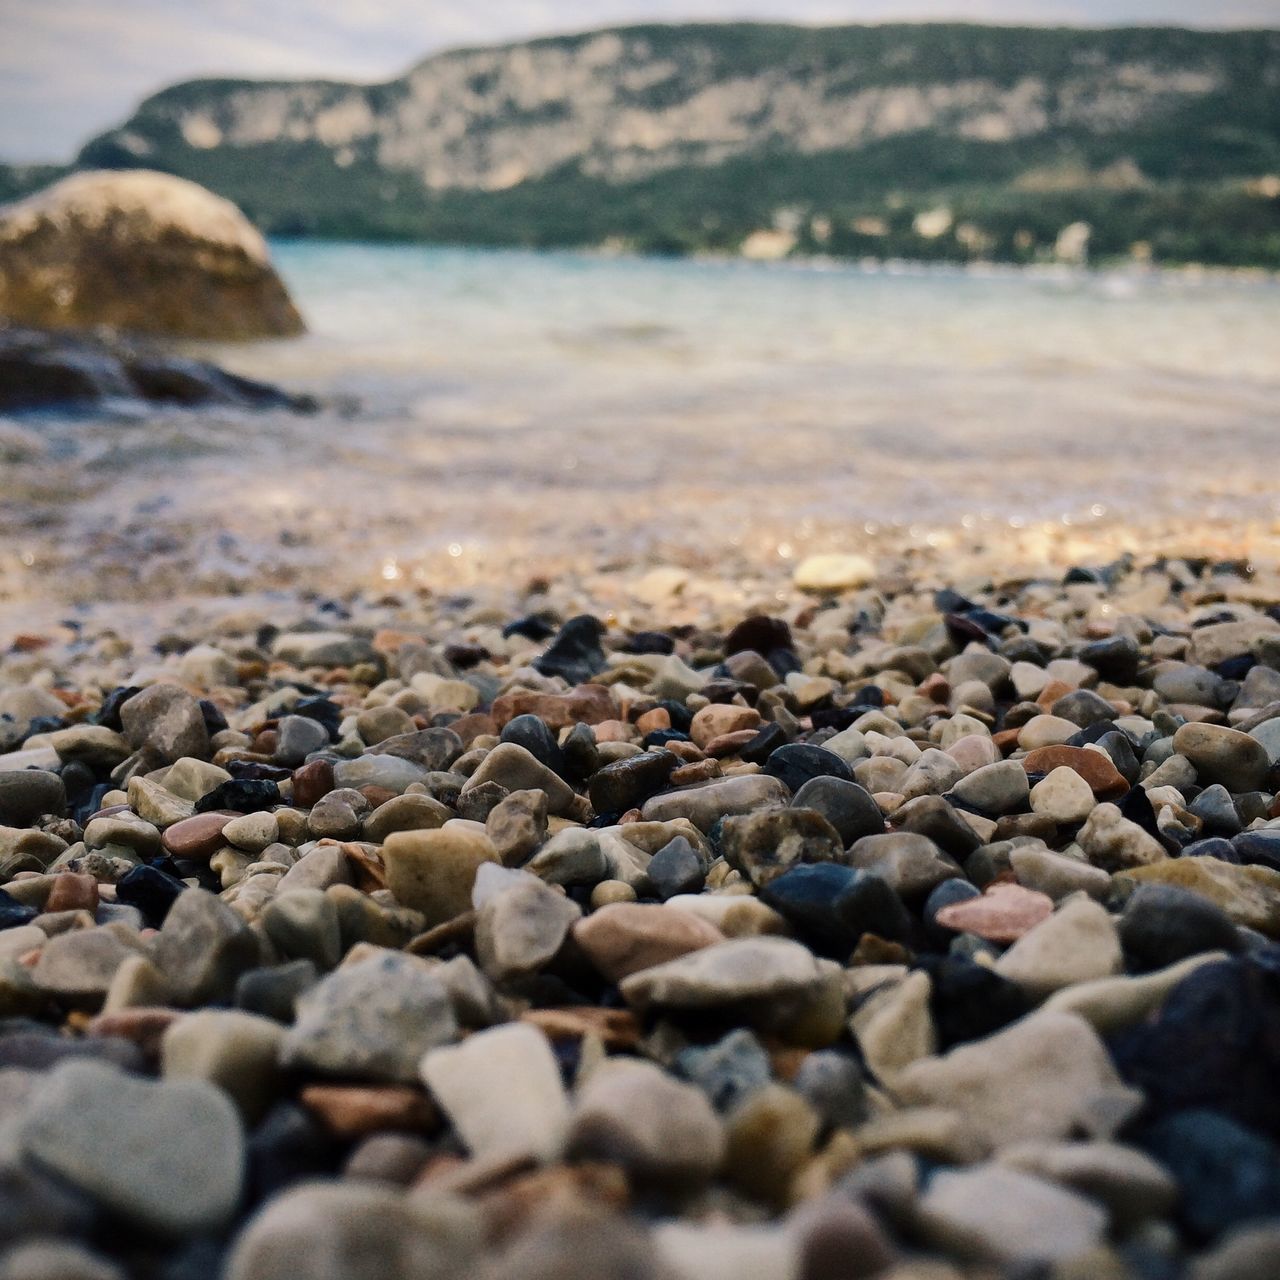 pebble, beach, stone - object, surface level, water, shore, rock - object, selective focus, stone, tranquility, nature, large group of objects, abundance, sea, tranquil scene, focus on foreground, beauty in nature, scenics, day, outdoors